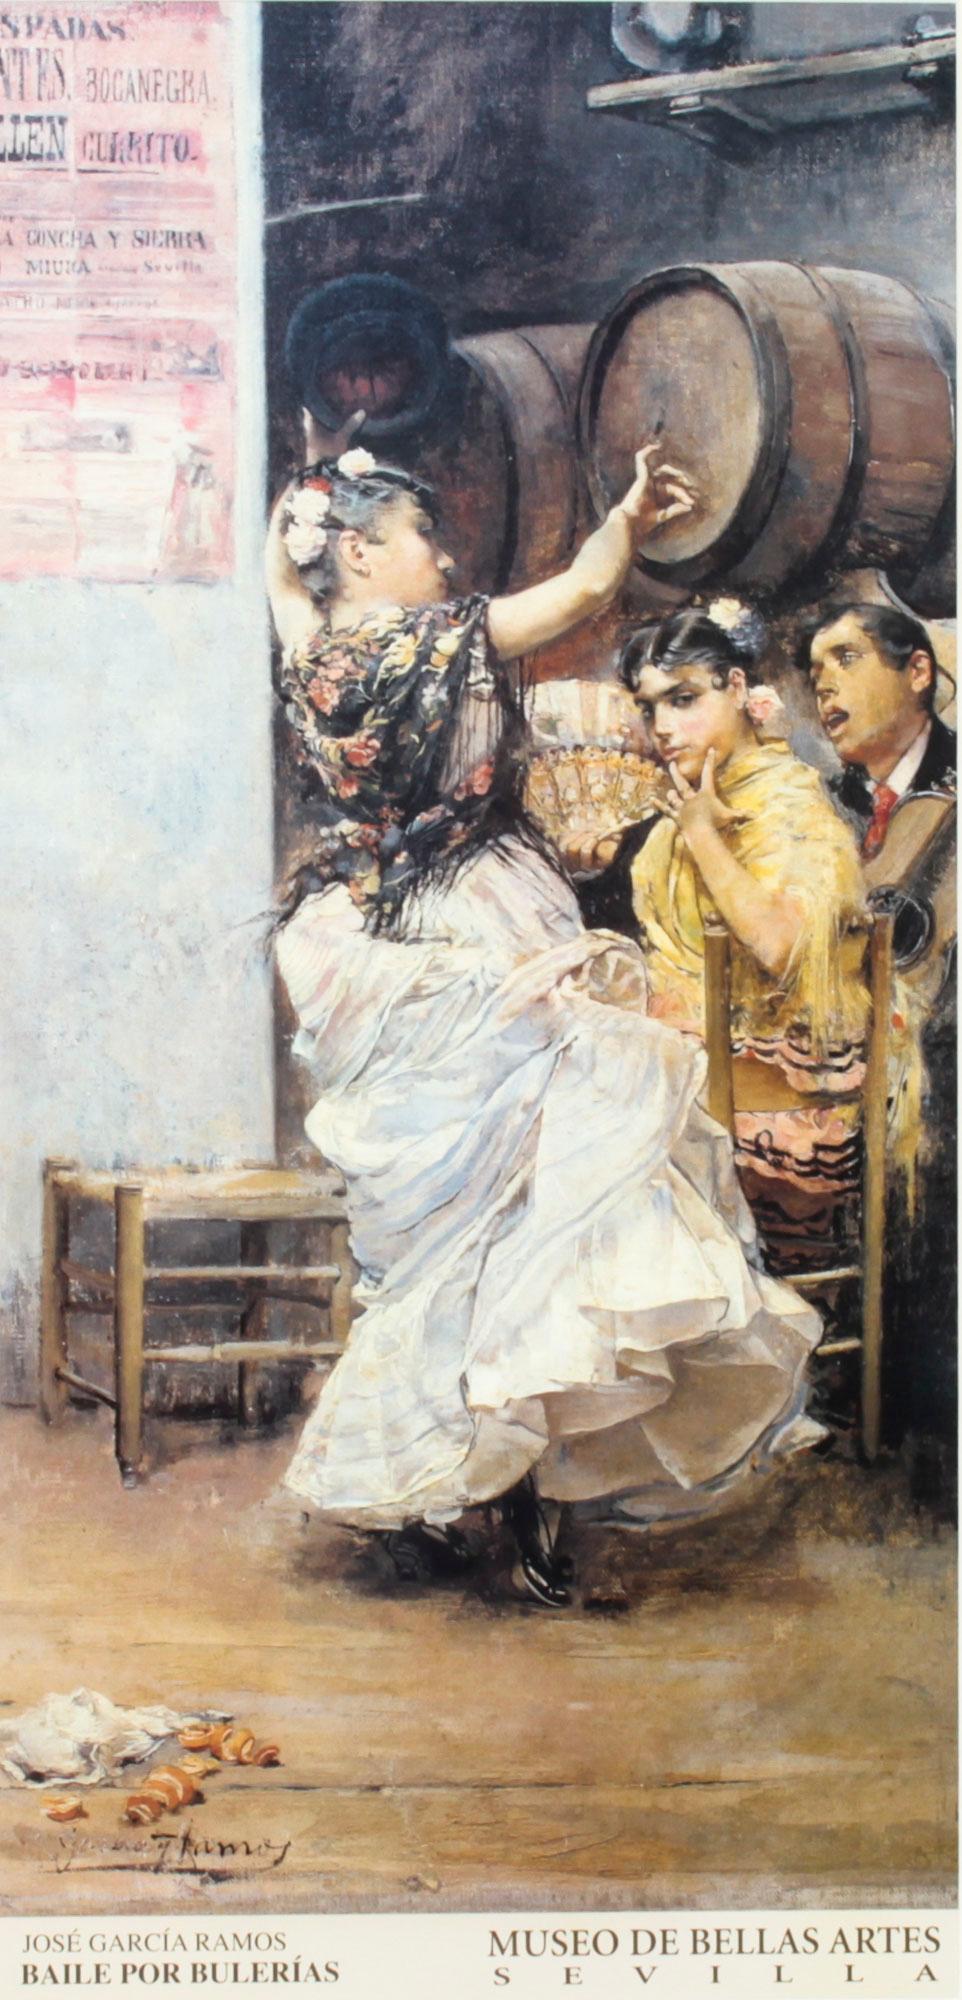 A beautiful vintage framed Spanish museum print of a Flamenco dancer, dating from the second half of the 20th century.

The print features a dancer in traditional costume and bears the text Jose Garcia Ramos, Baile Por Bulerias, Museo De Bellas